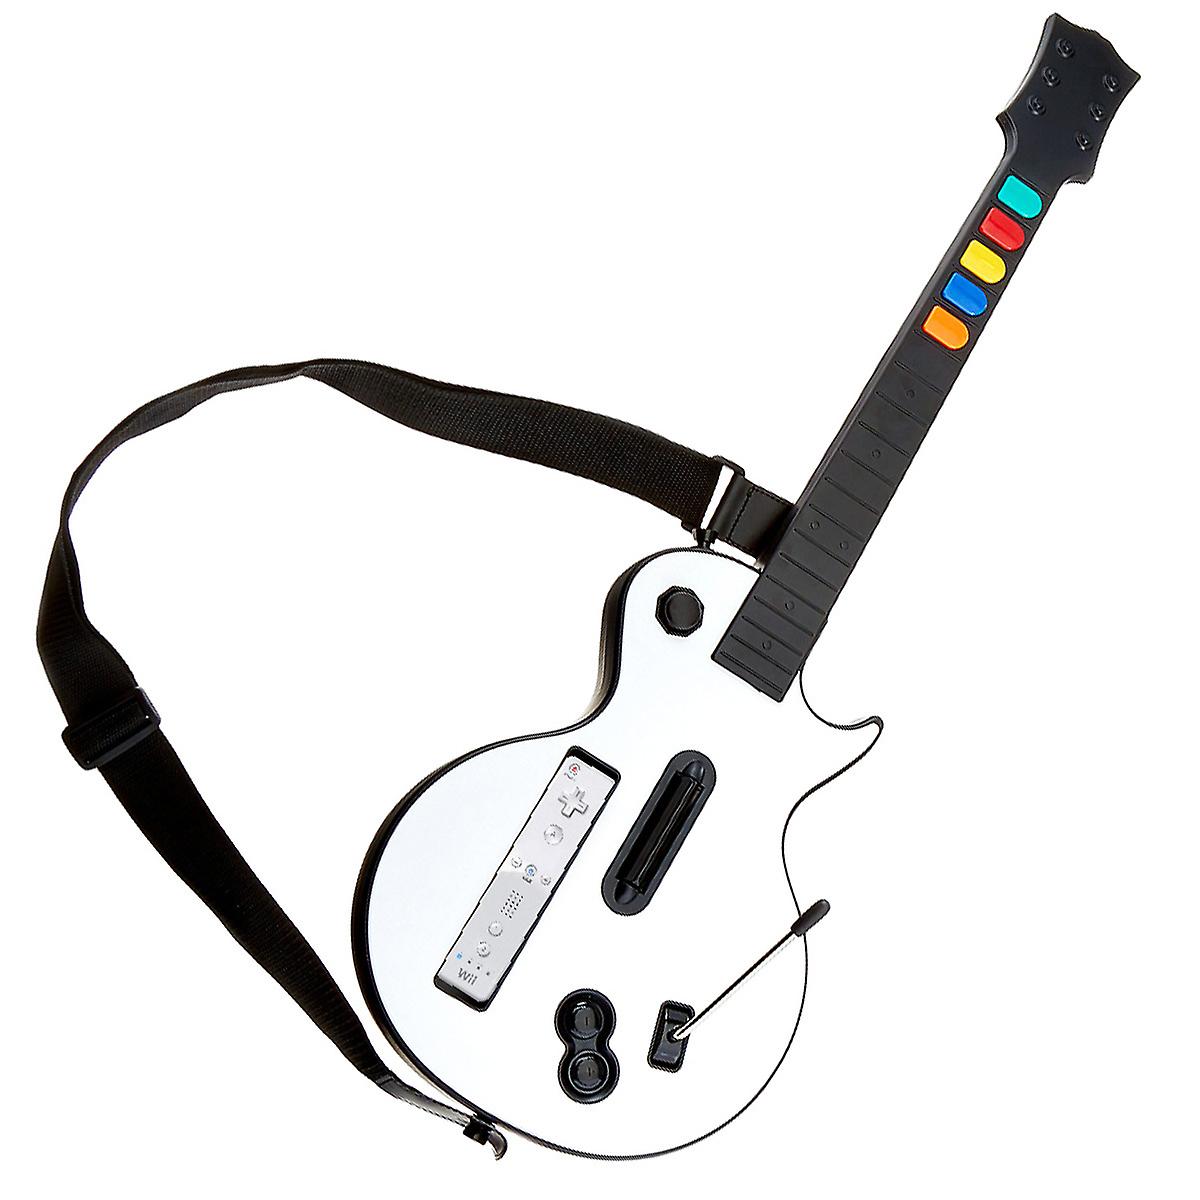 Wii Connection: Rockband Guitar Without Dongle